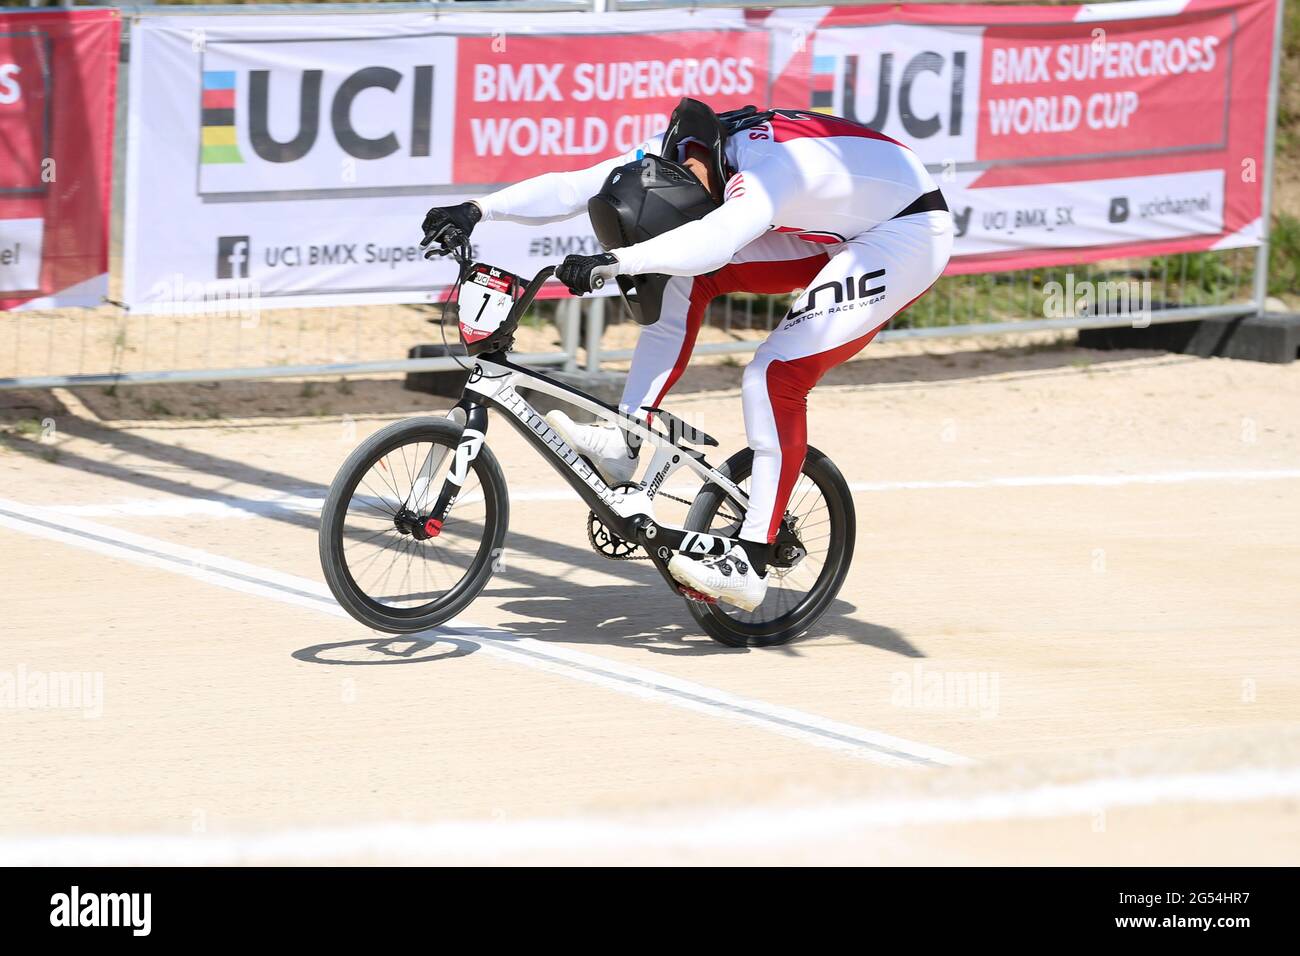 David GRAF of Switzerland (7) leads the pack in the UCI BMX Supercross  World Cup Round 1 at the BMX Olympic Arena on May 8th 2021 in Verona, Italy  Stock Photo - Alamy